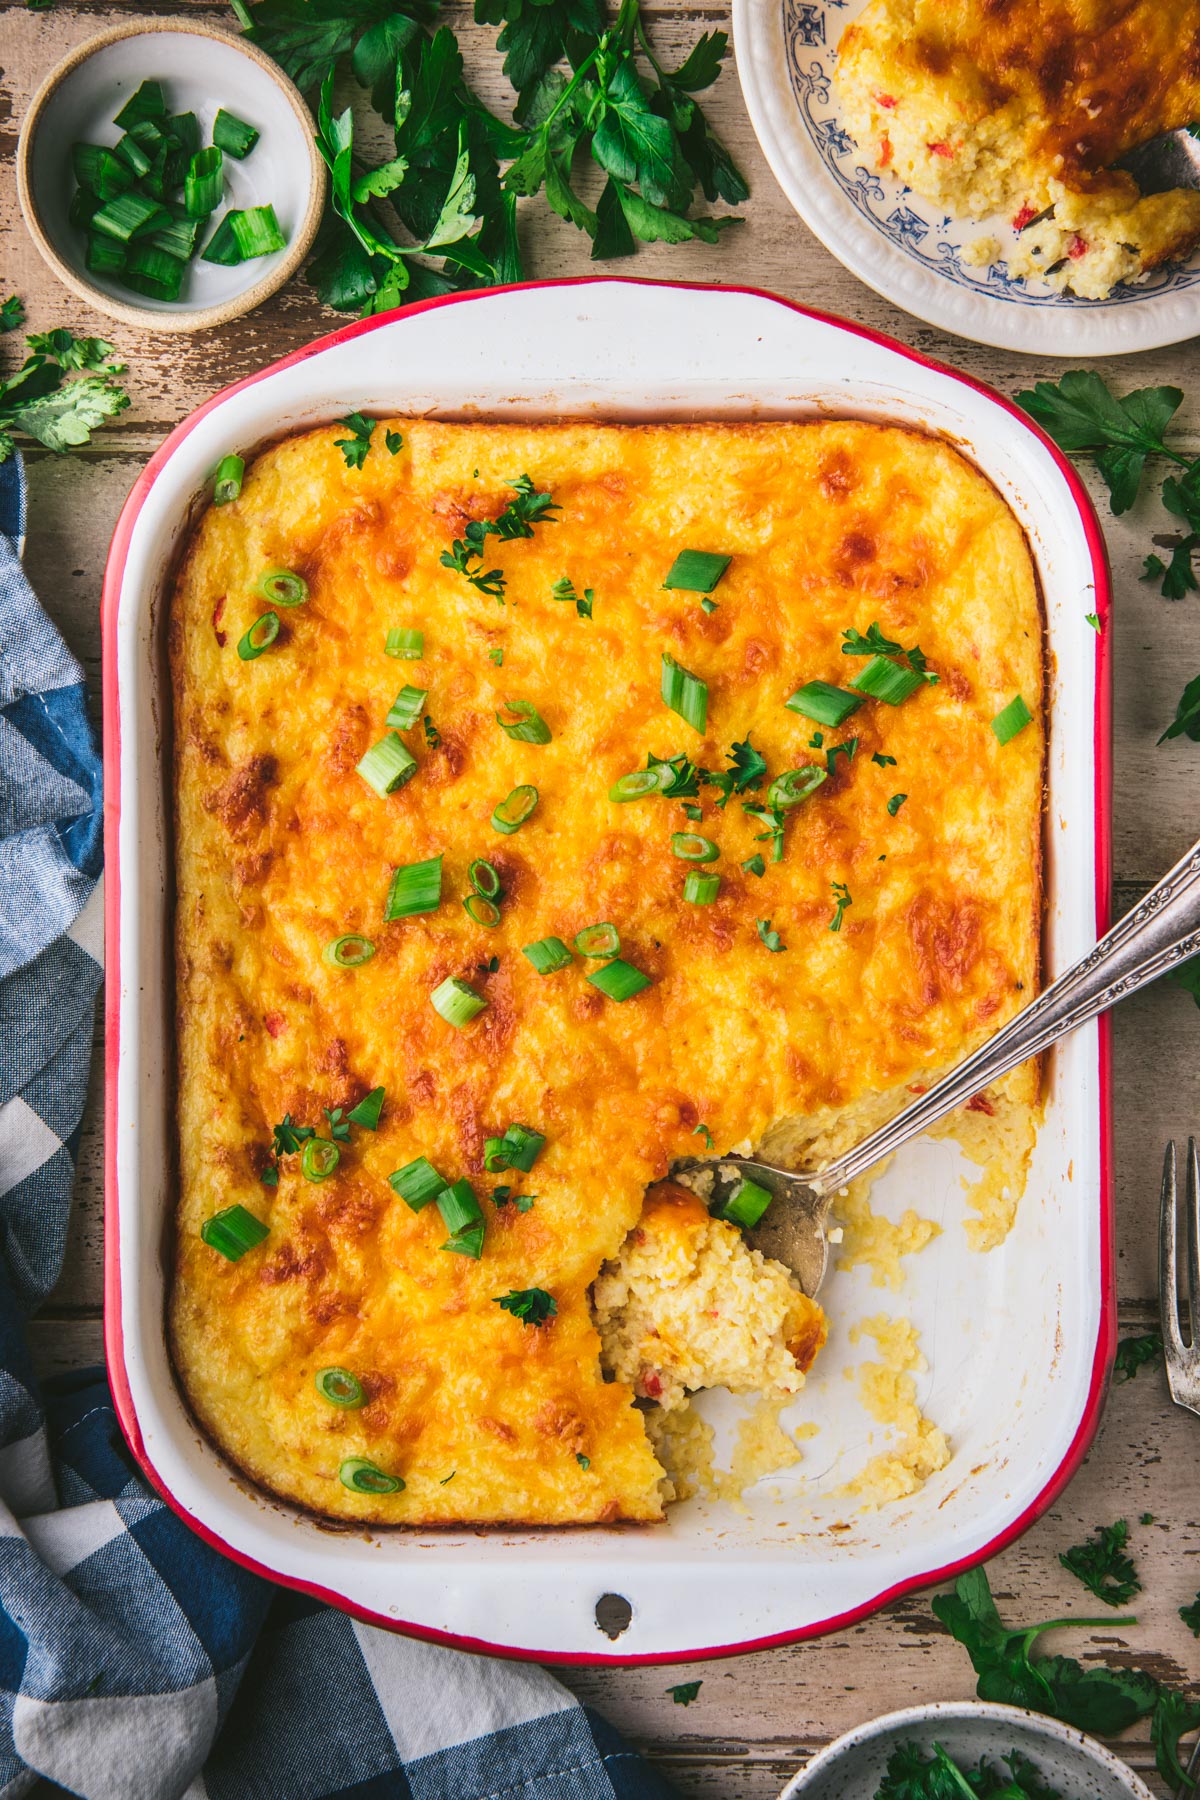 Spoon in a cheese grits casserole on a wooden table